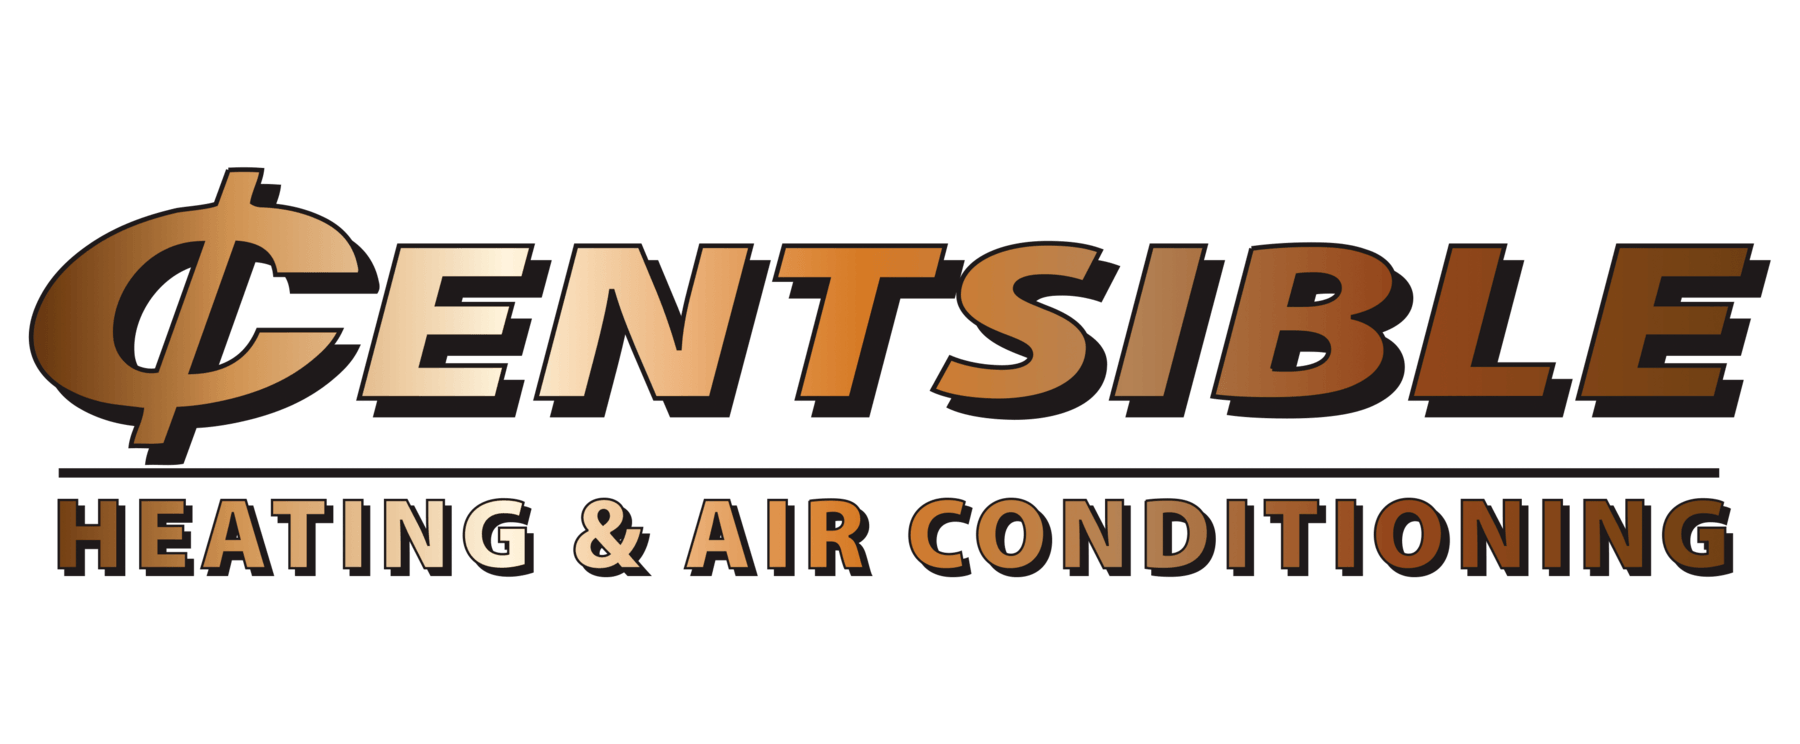 Centsible Heating & Air Conditioning